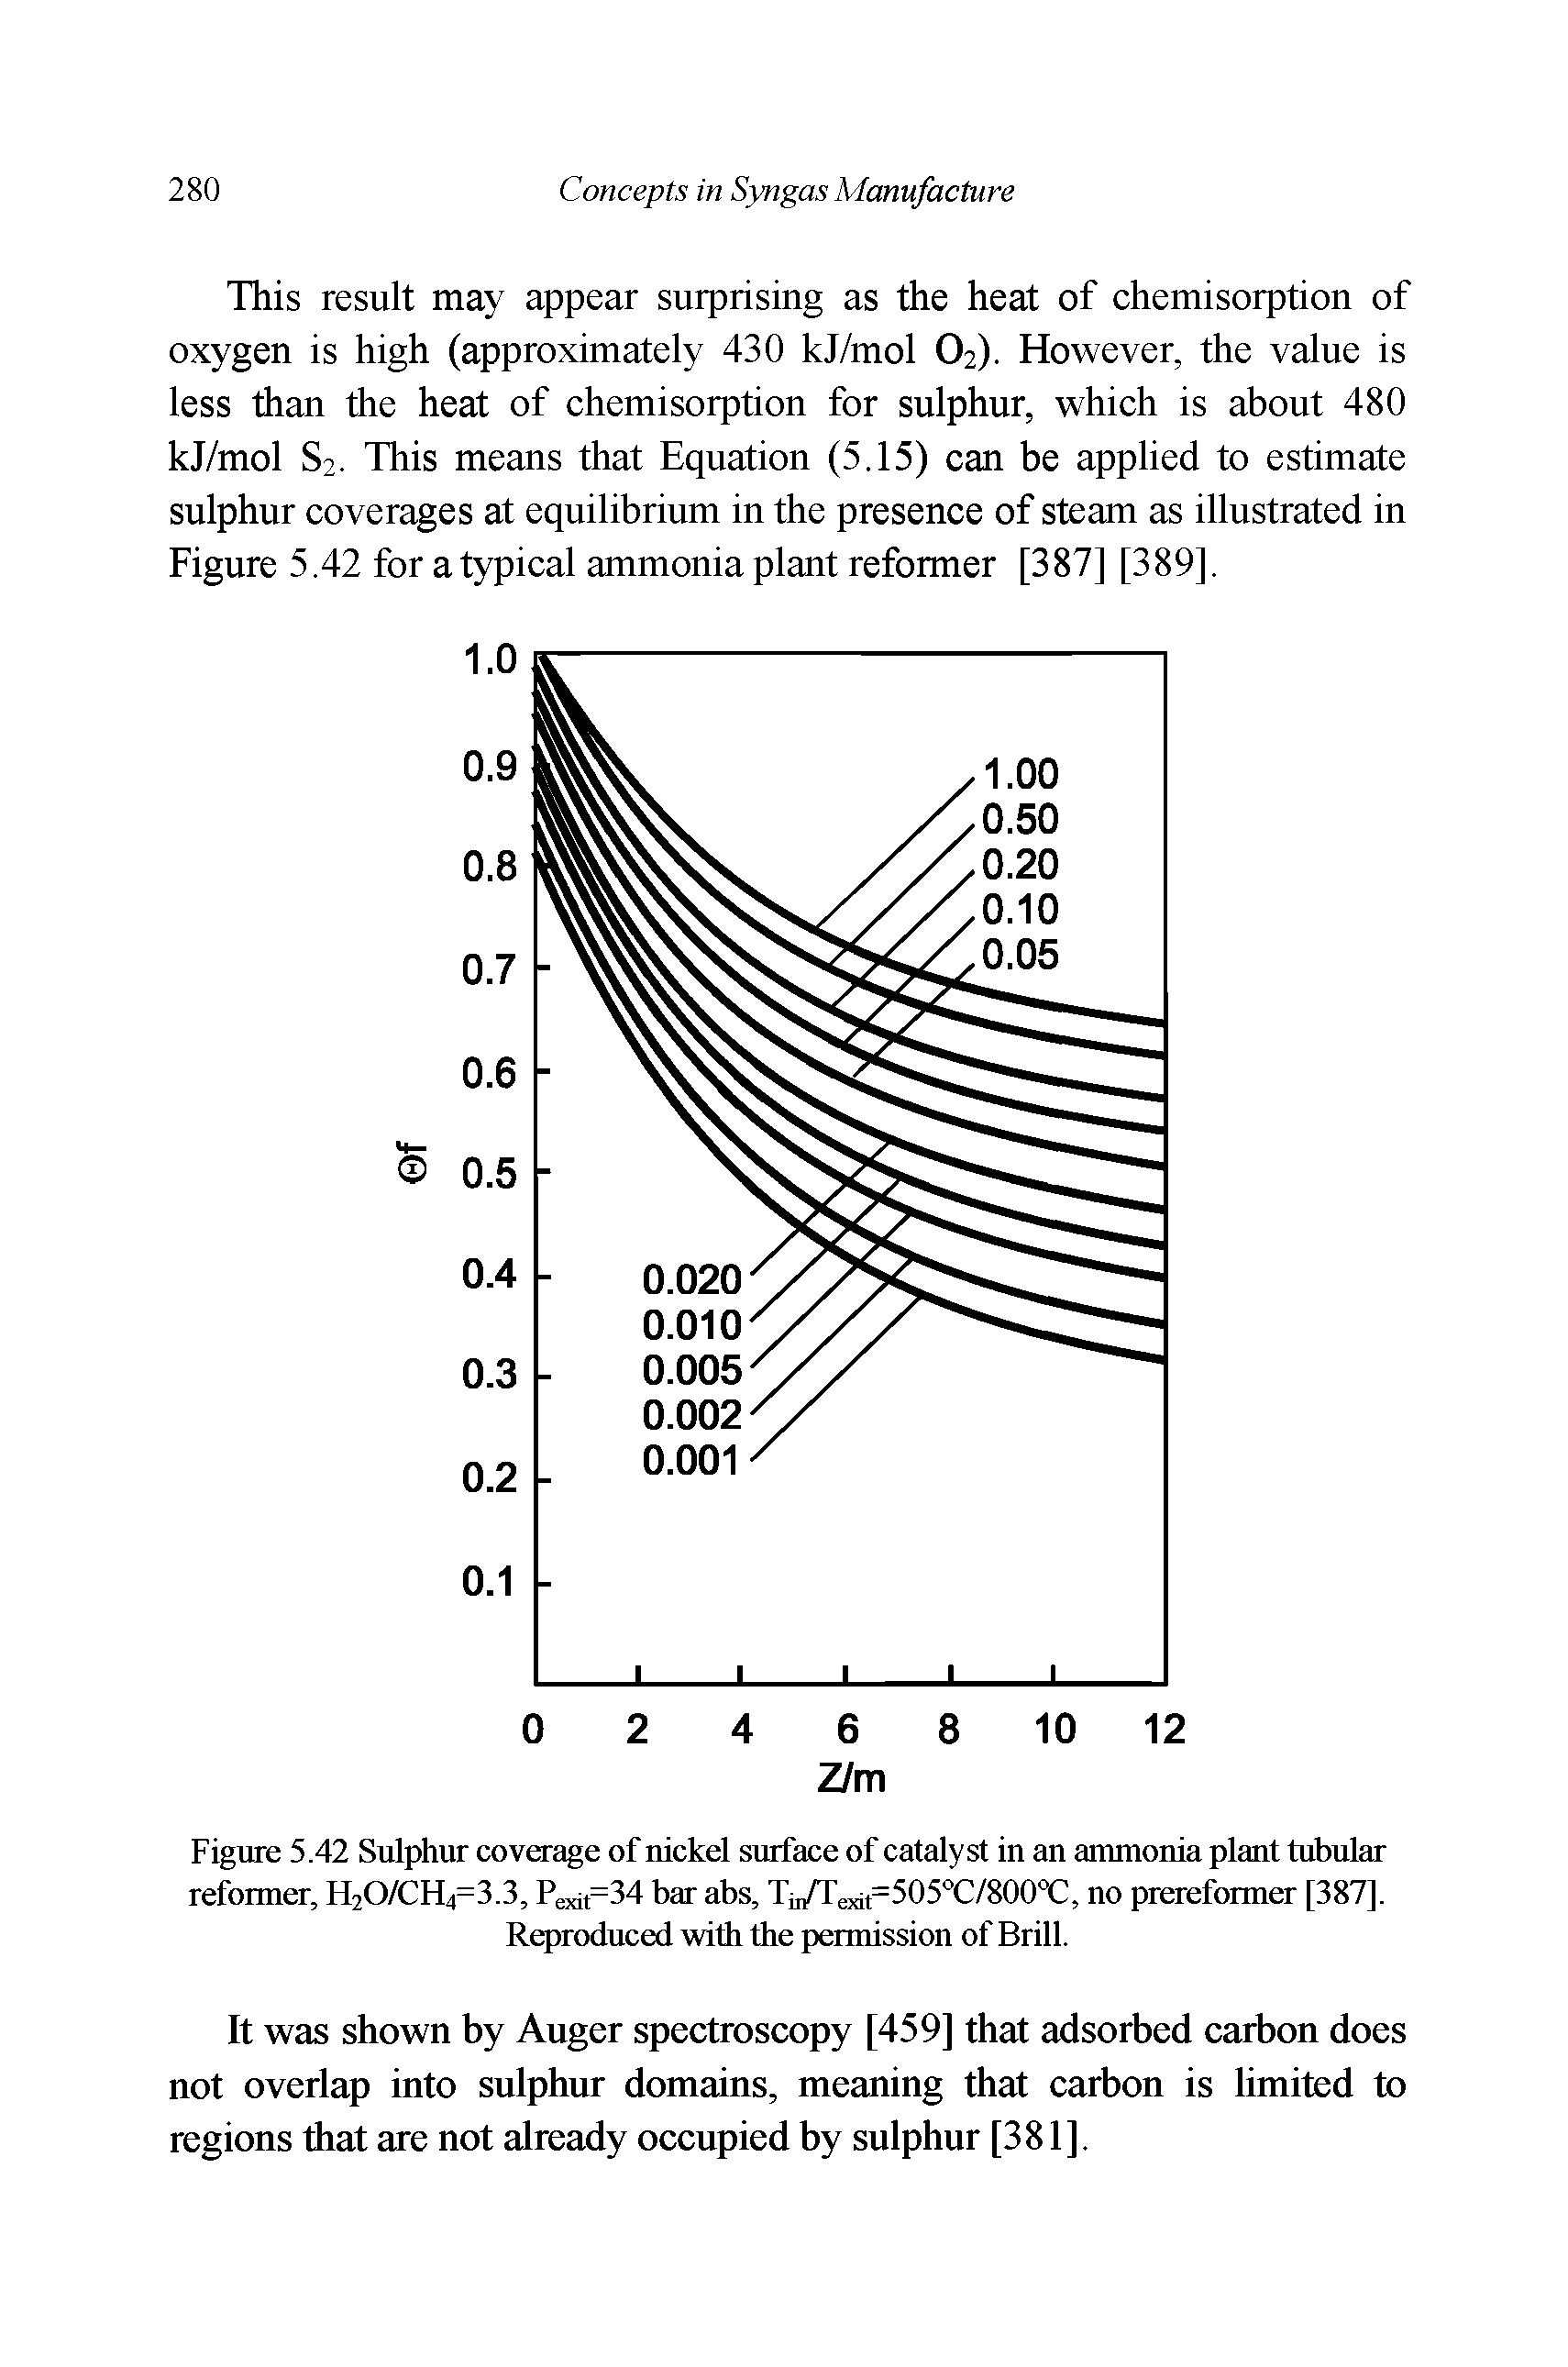 Figure 5.42 Sulphur coverage of nickel surface of catalyst in an anunonia plant tubular reformer, H20/CH4=3.3, Pexit=34 bar abs, Tii/Texit=505°C/800 C, no prereformer [387]. Reproduced with the permission of Brill.